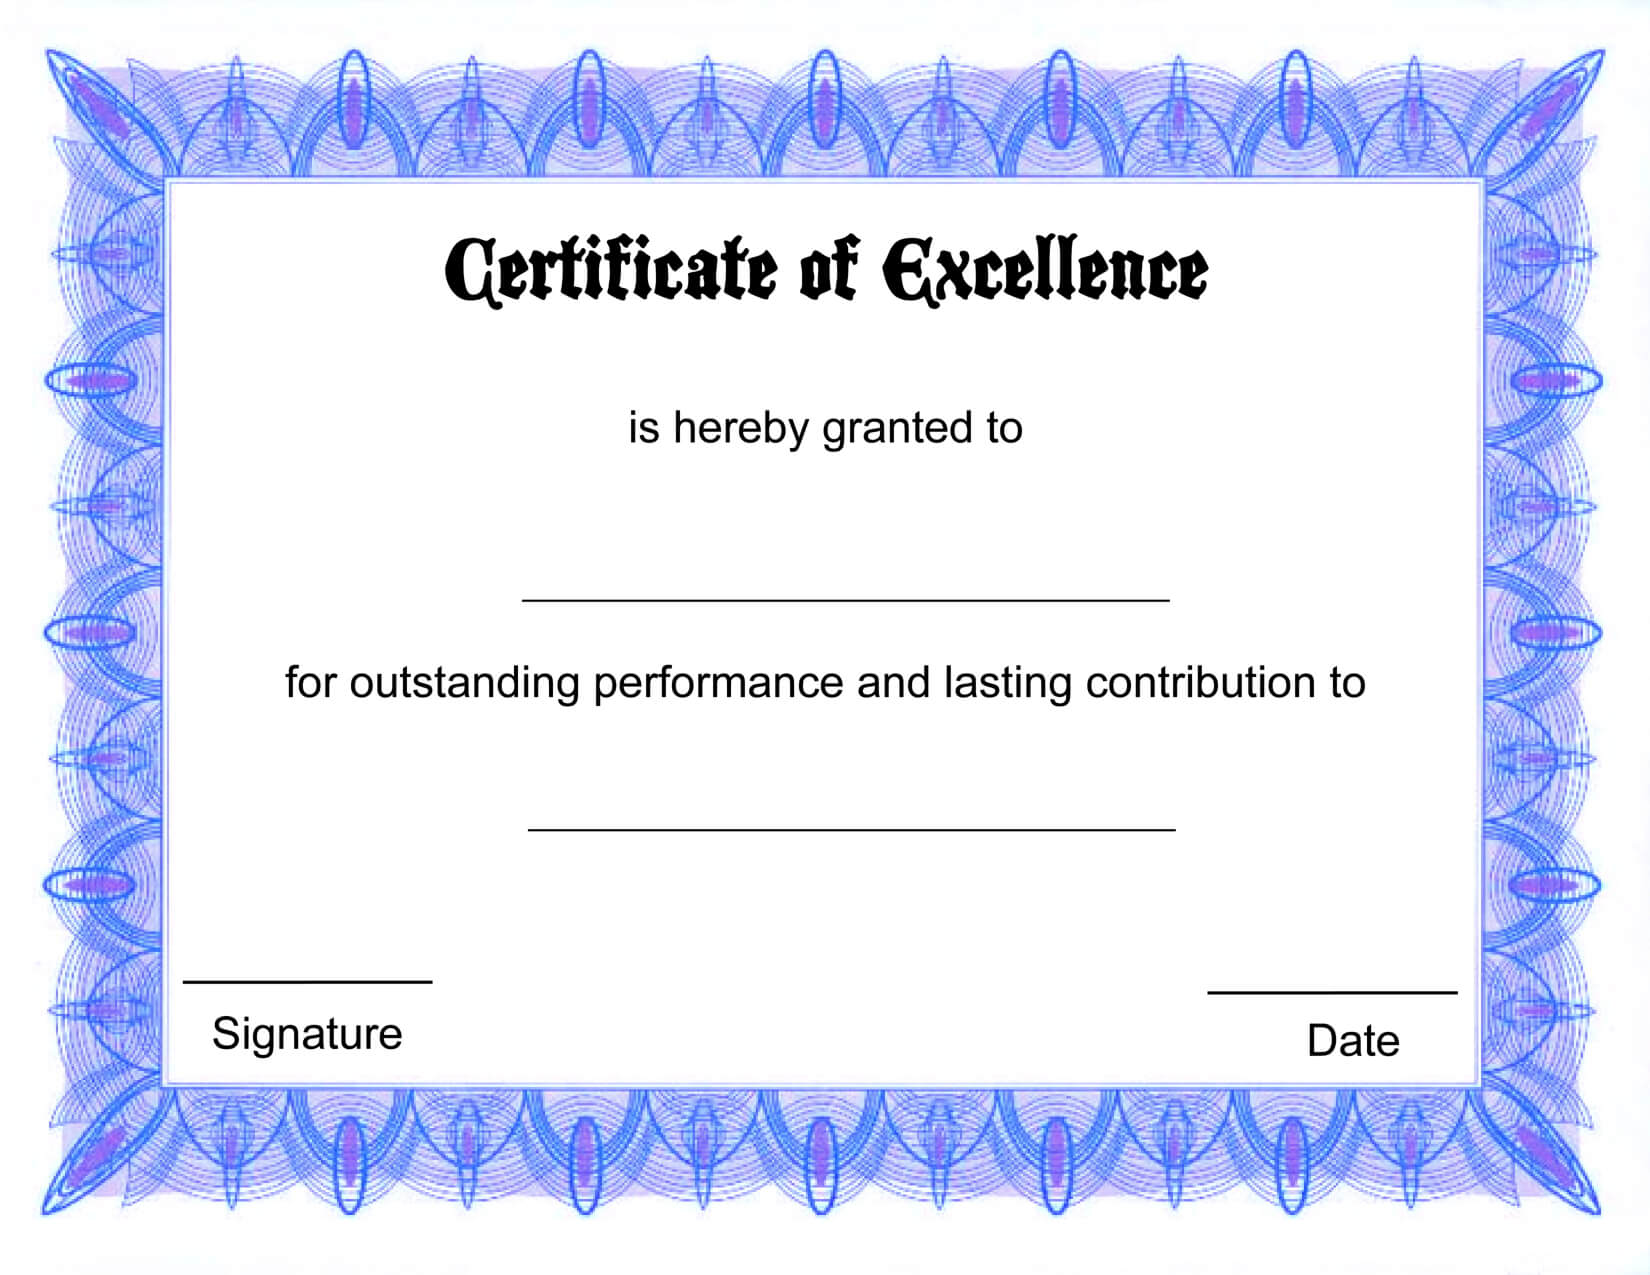 Blank Certificate Templates Of Excellence | Kiddo Shelter Throughout Free Printable Blank Award Certificate Templates